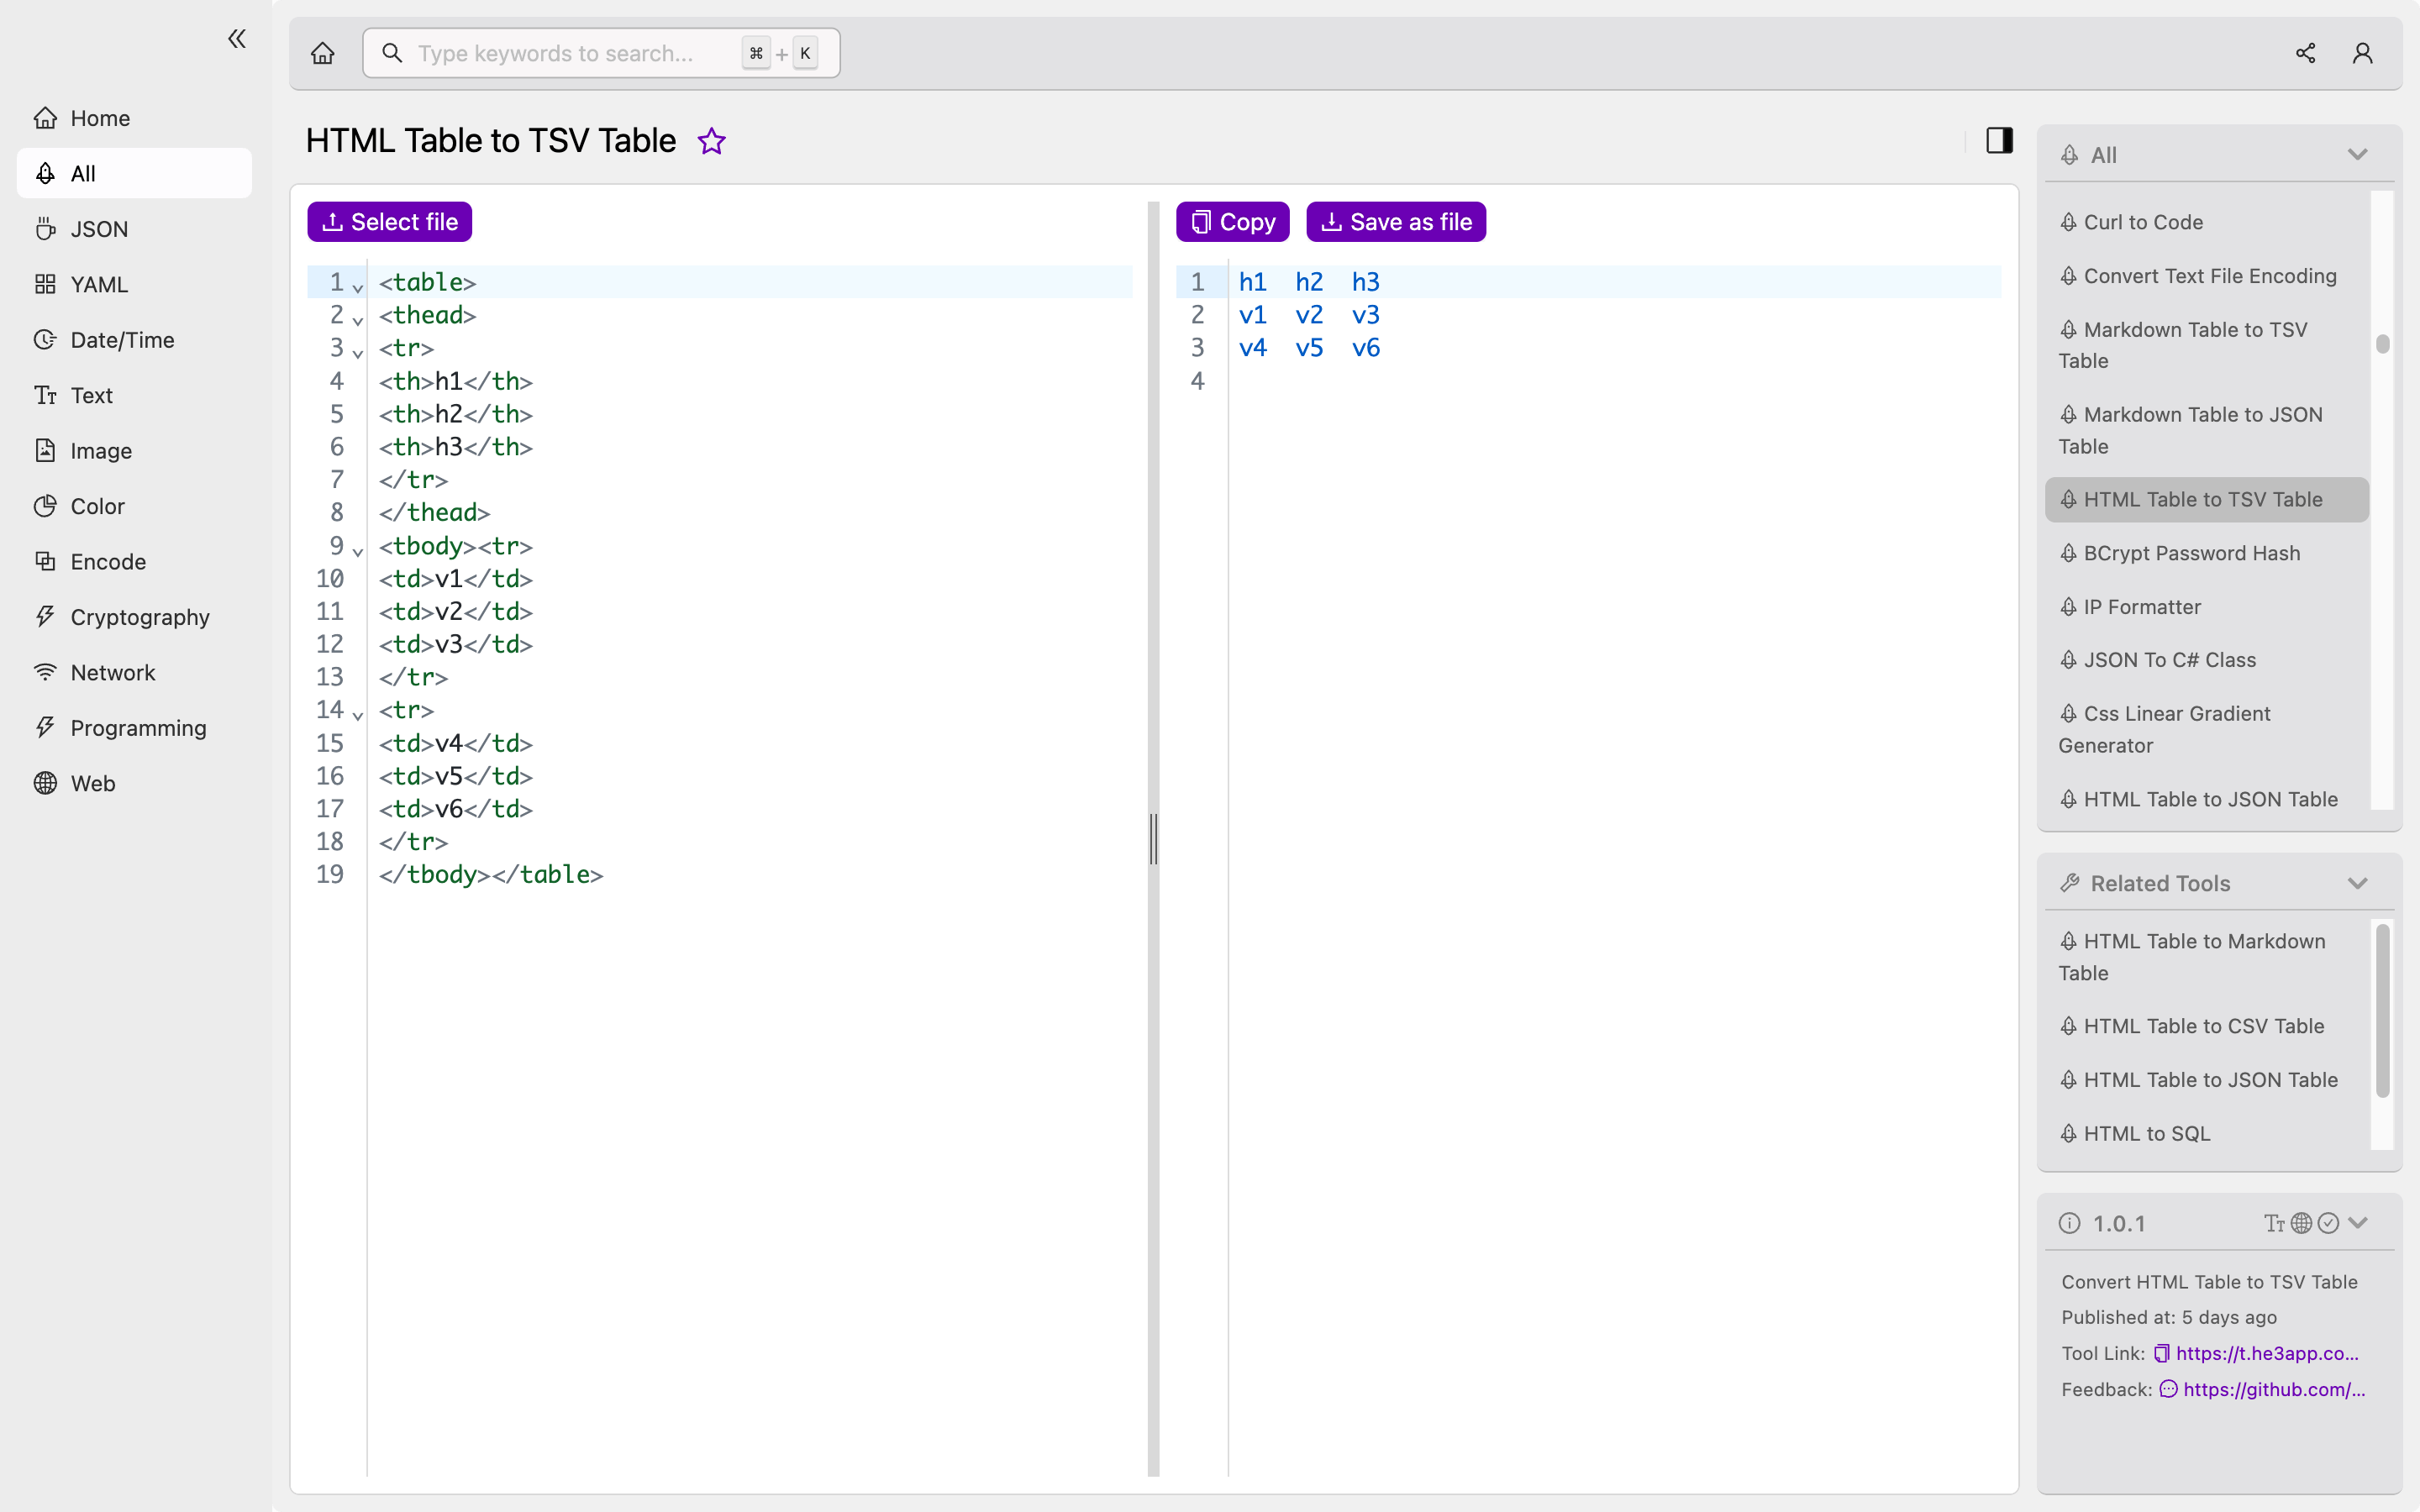 HTML Table to TSV Table